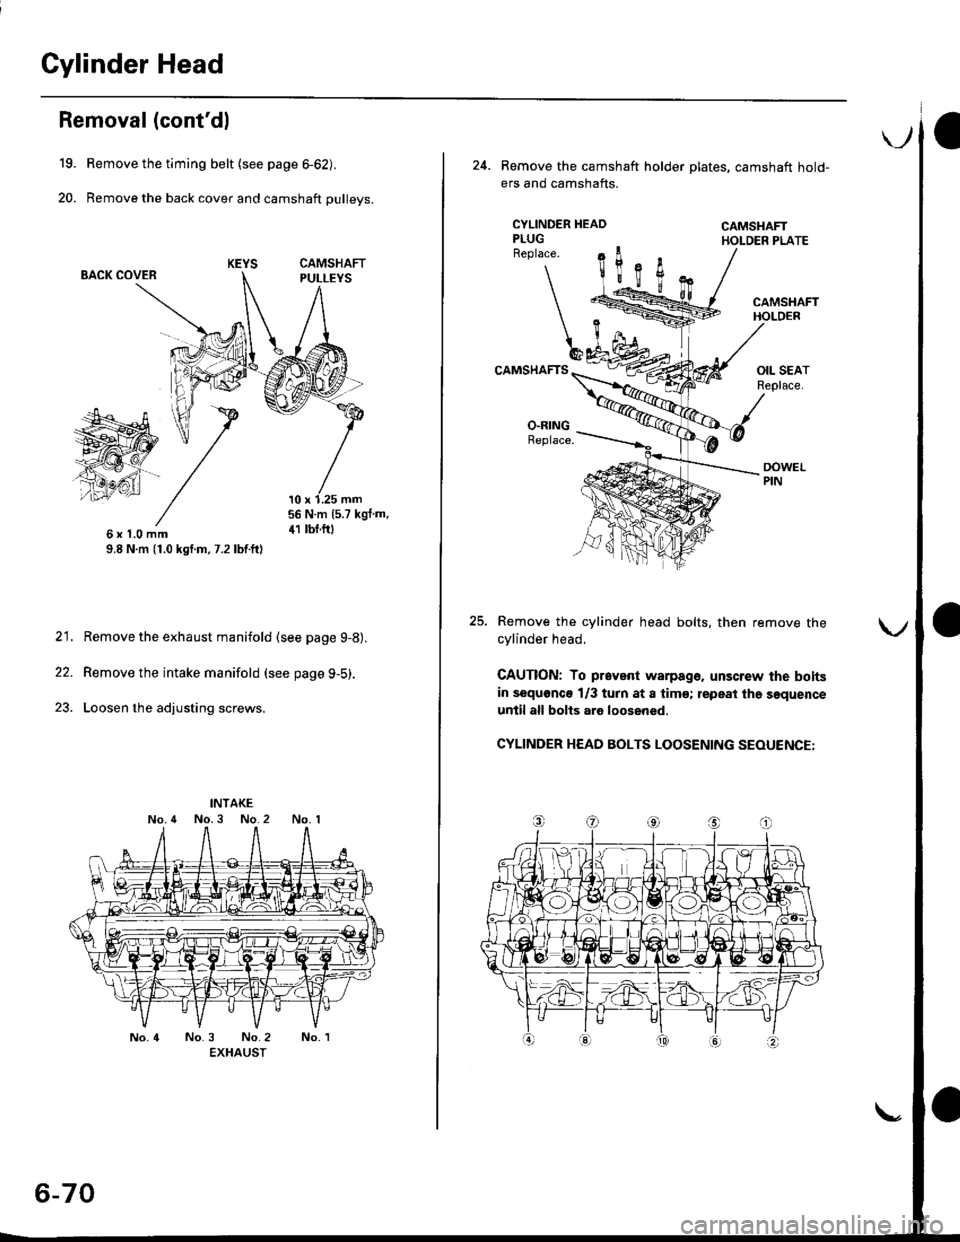 HONDA CIVIC 1999 6.G Owners Manual Cylinder Head
19.
20.
Removal (contdl
Remove the timing belt {see page 6-62).
Remove the back cover and camshaft pulleys.
BACK COVER
56 N.m (5.7 kgf m,
41 tbt.f06xl.0mm9.8 N,m (1.0 kgf.m, 7.2 lbf.ft)